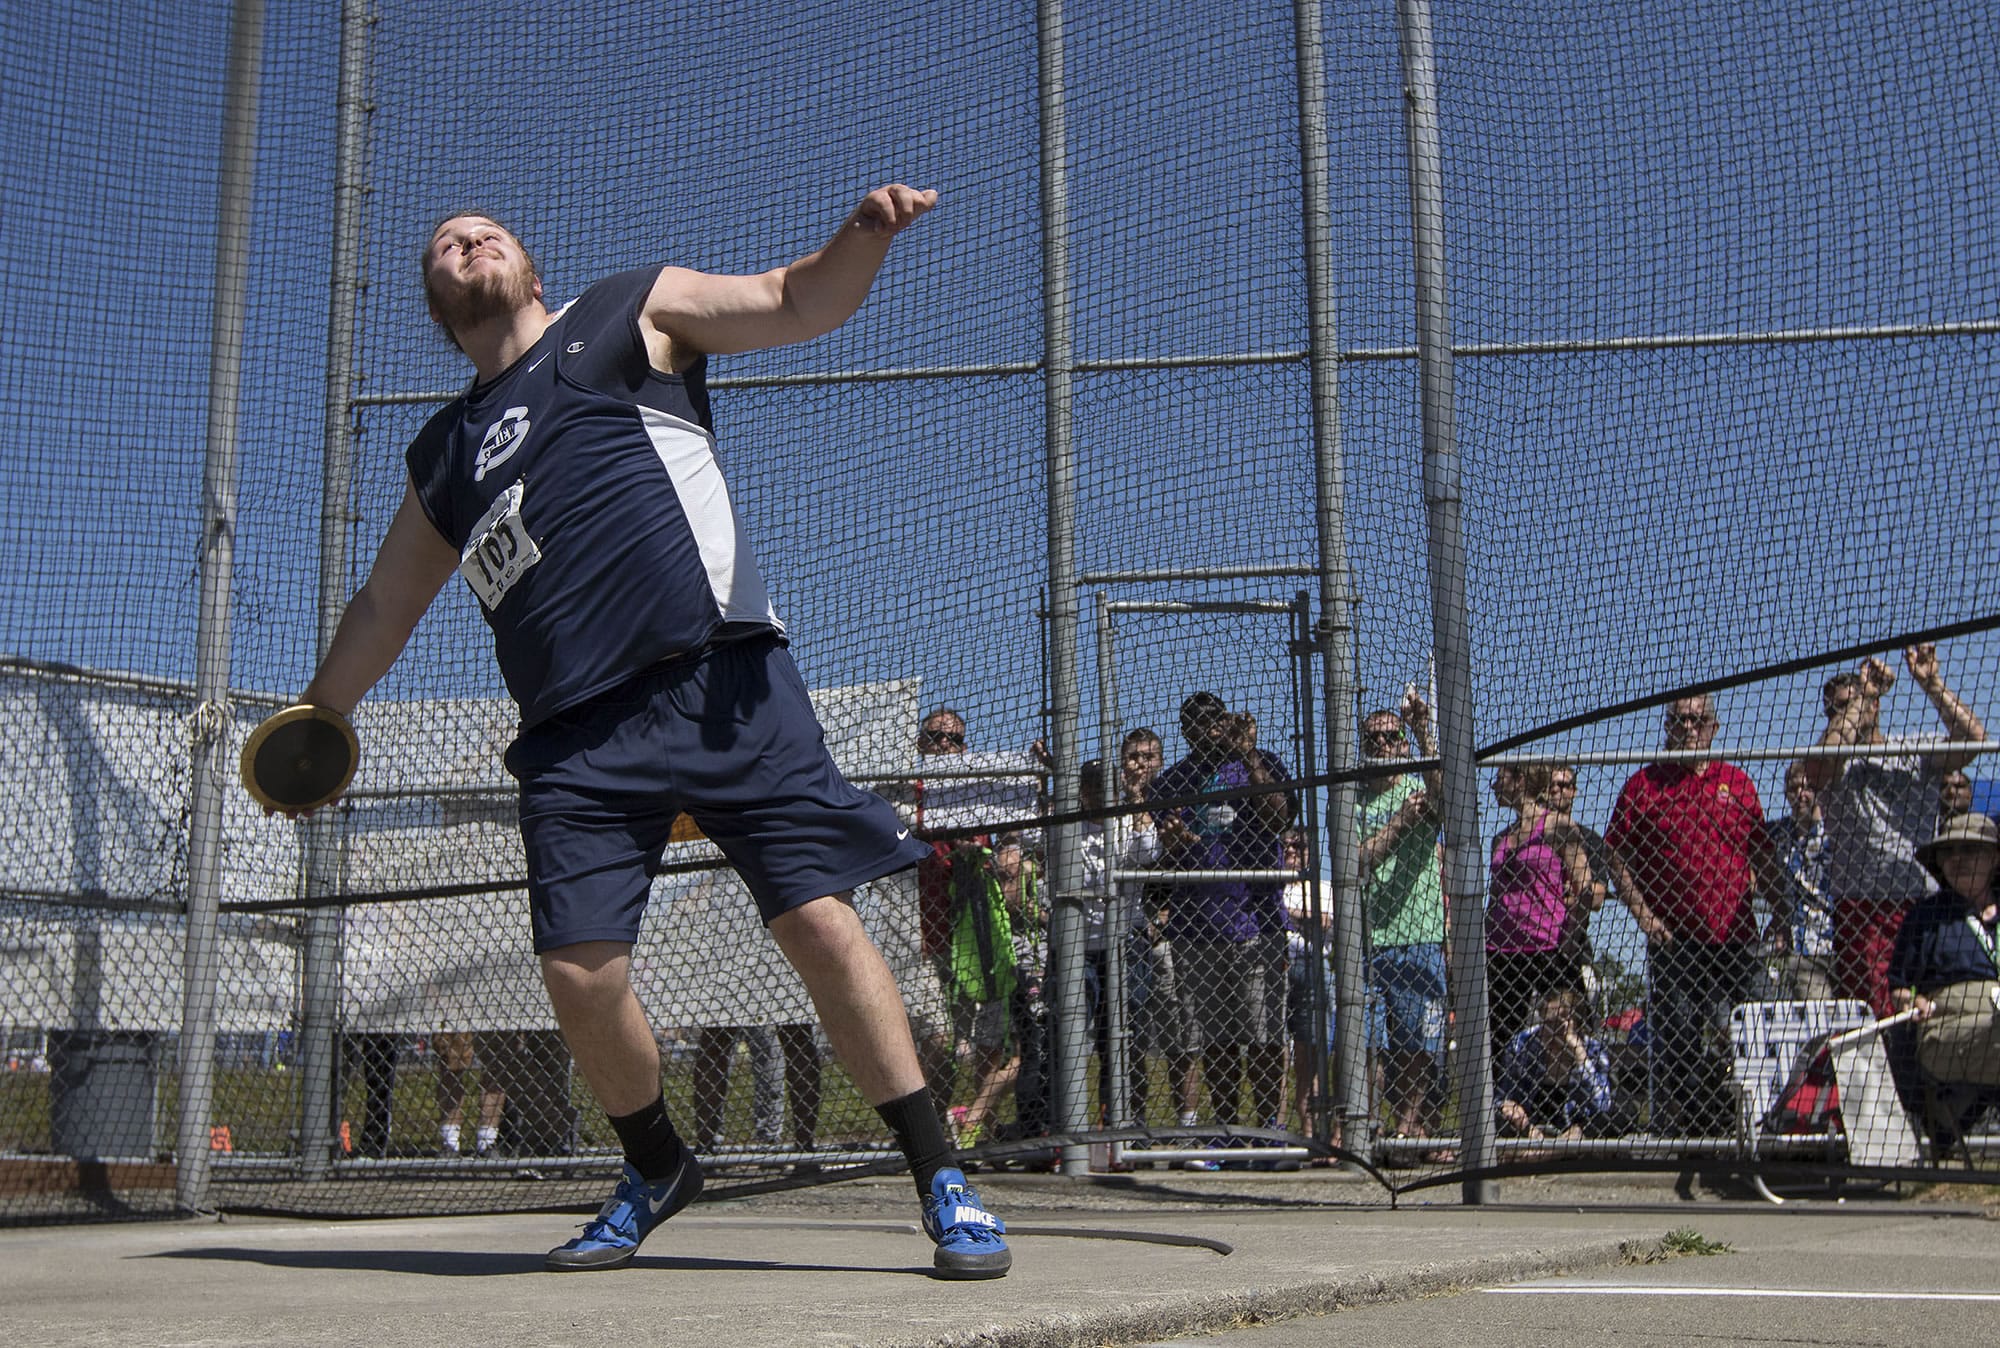 Skyview's Conner Jensen gets ready to uncork a throw in the 4A Boys Discus Throw event at the WA State Track and Field Meet Friday, May 26, 2017, in Tacoma, Wash. Jensen won the event with a toss of 183' 7".